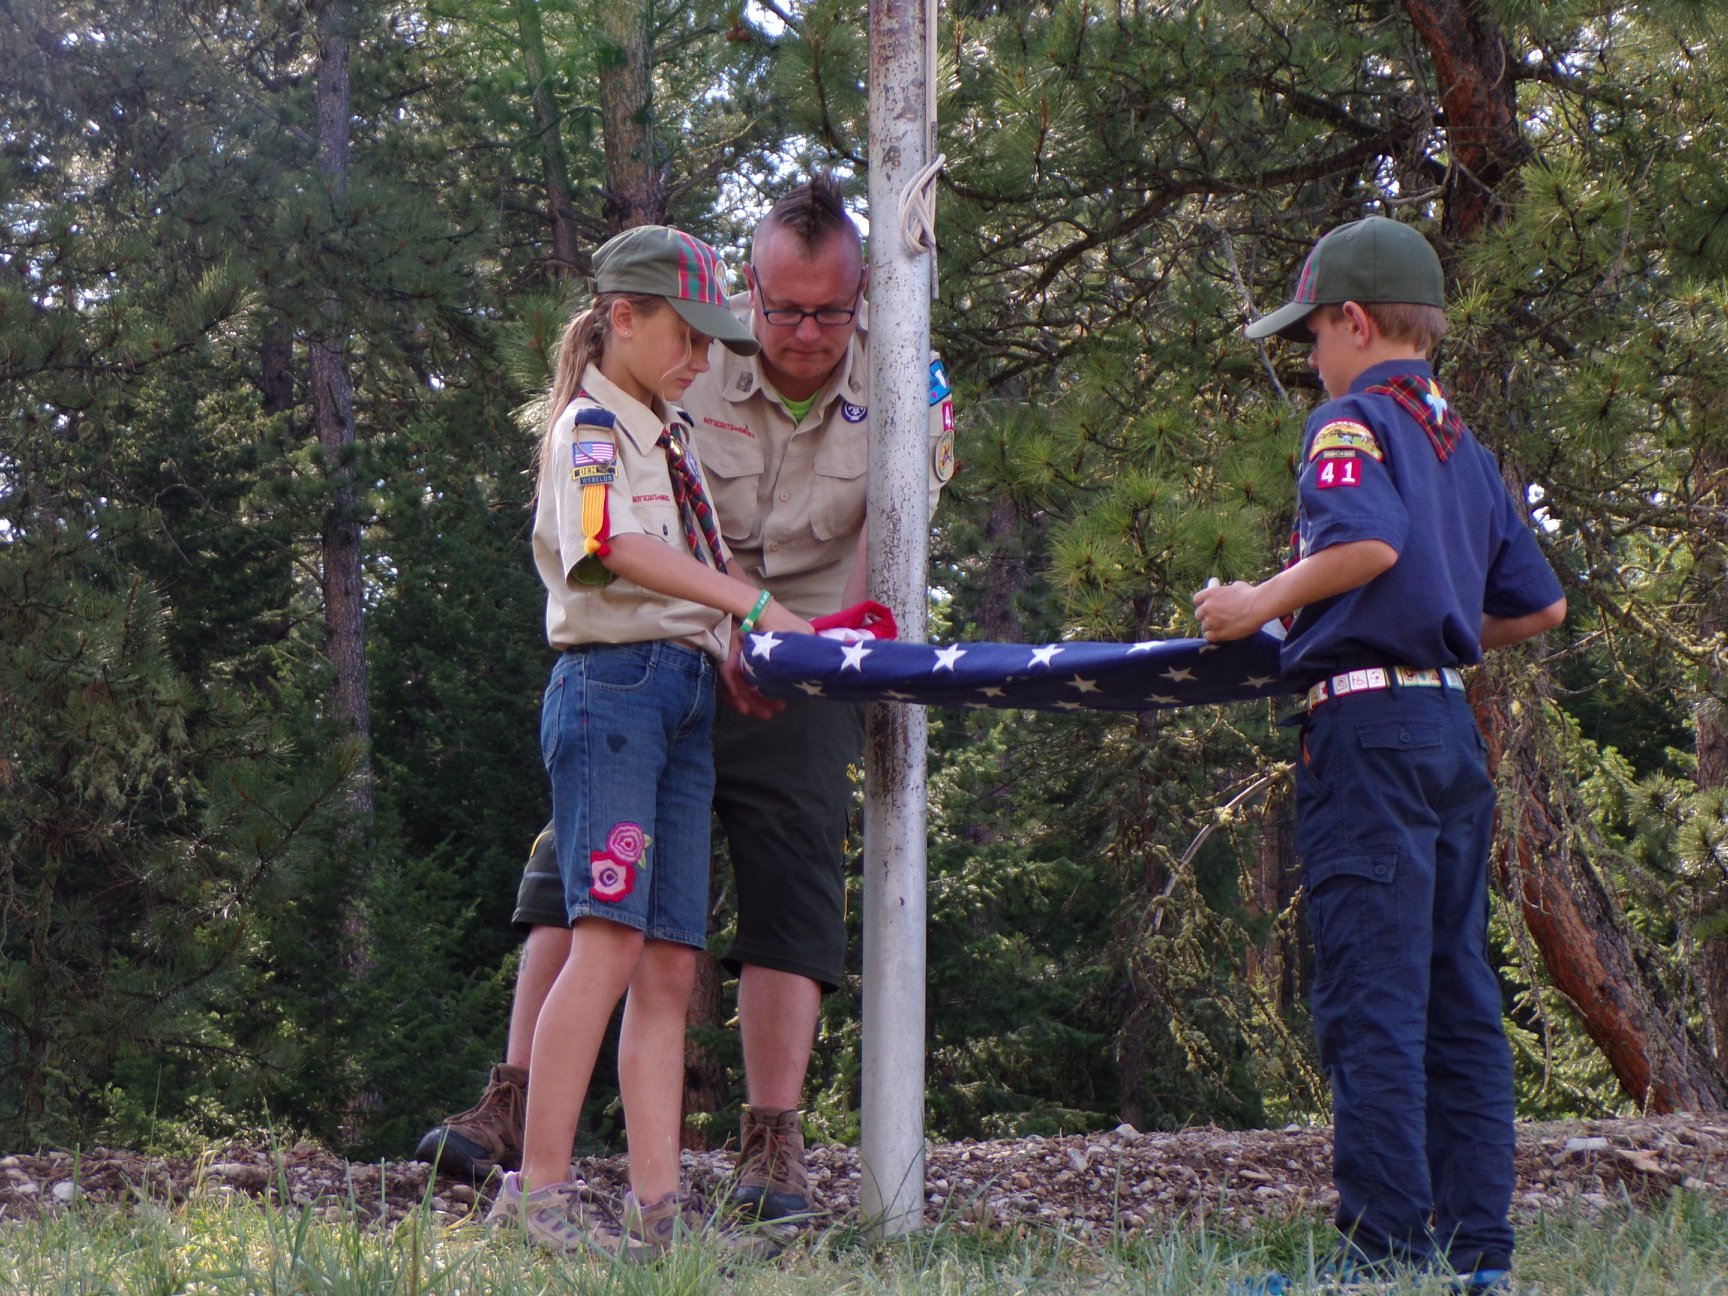 Two Scouts in uniform properly fold an American flag at summer camp.